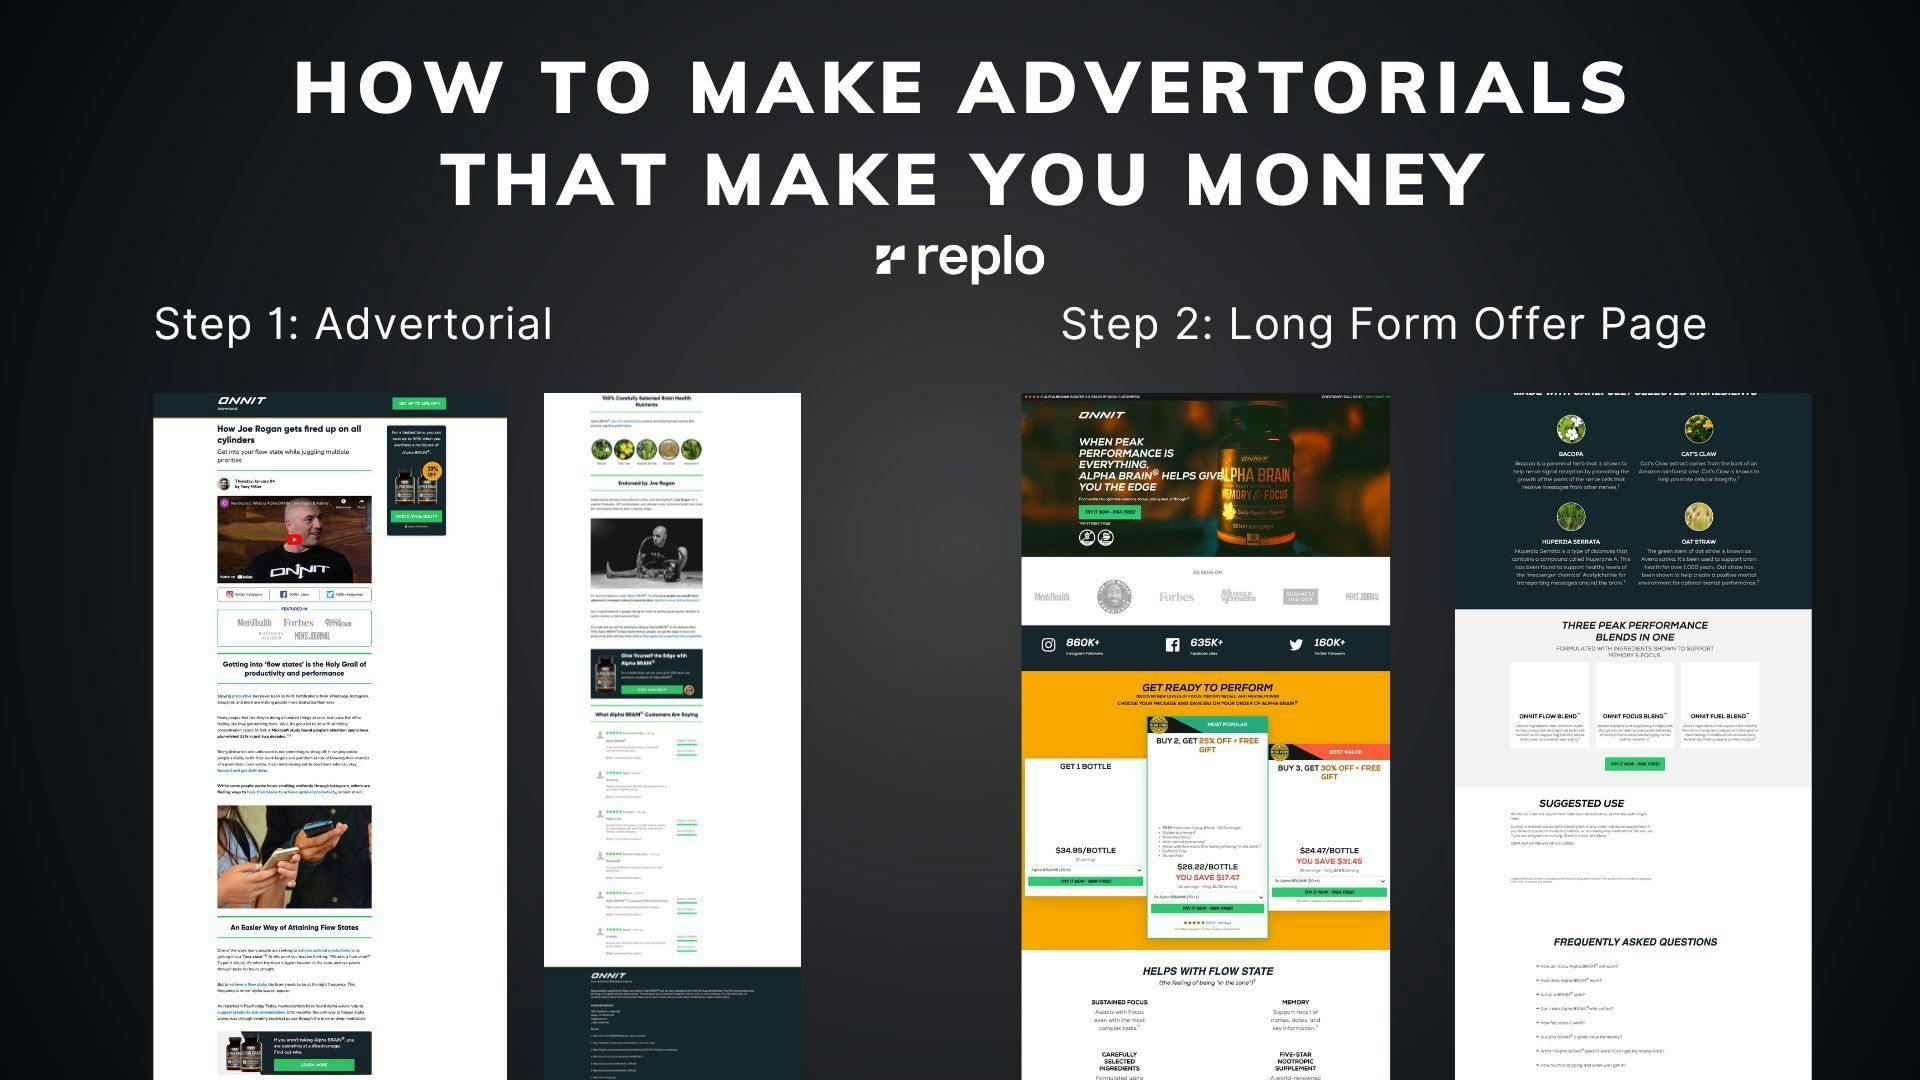 How To Make Advertorials That Make You Money: A Guide For Health, Wellness, and Supplement Companies